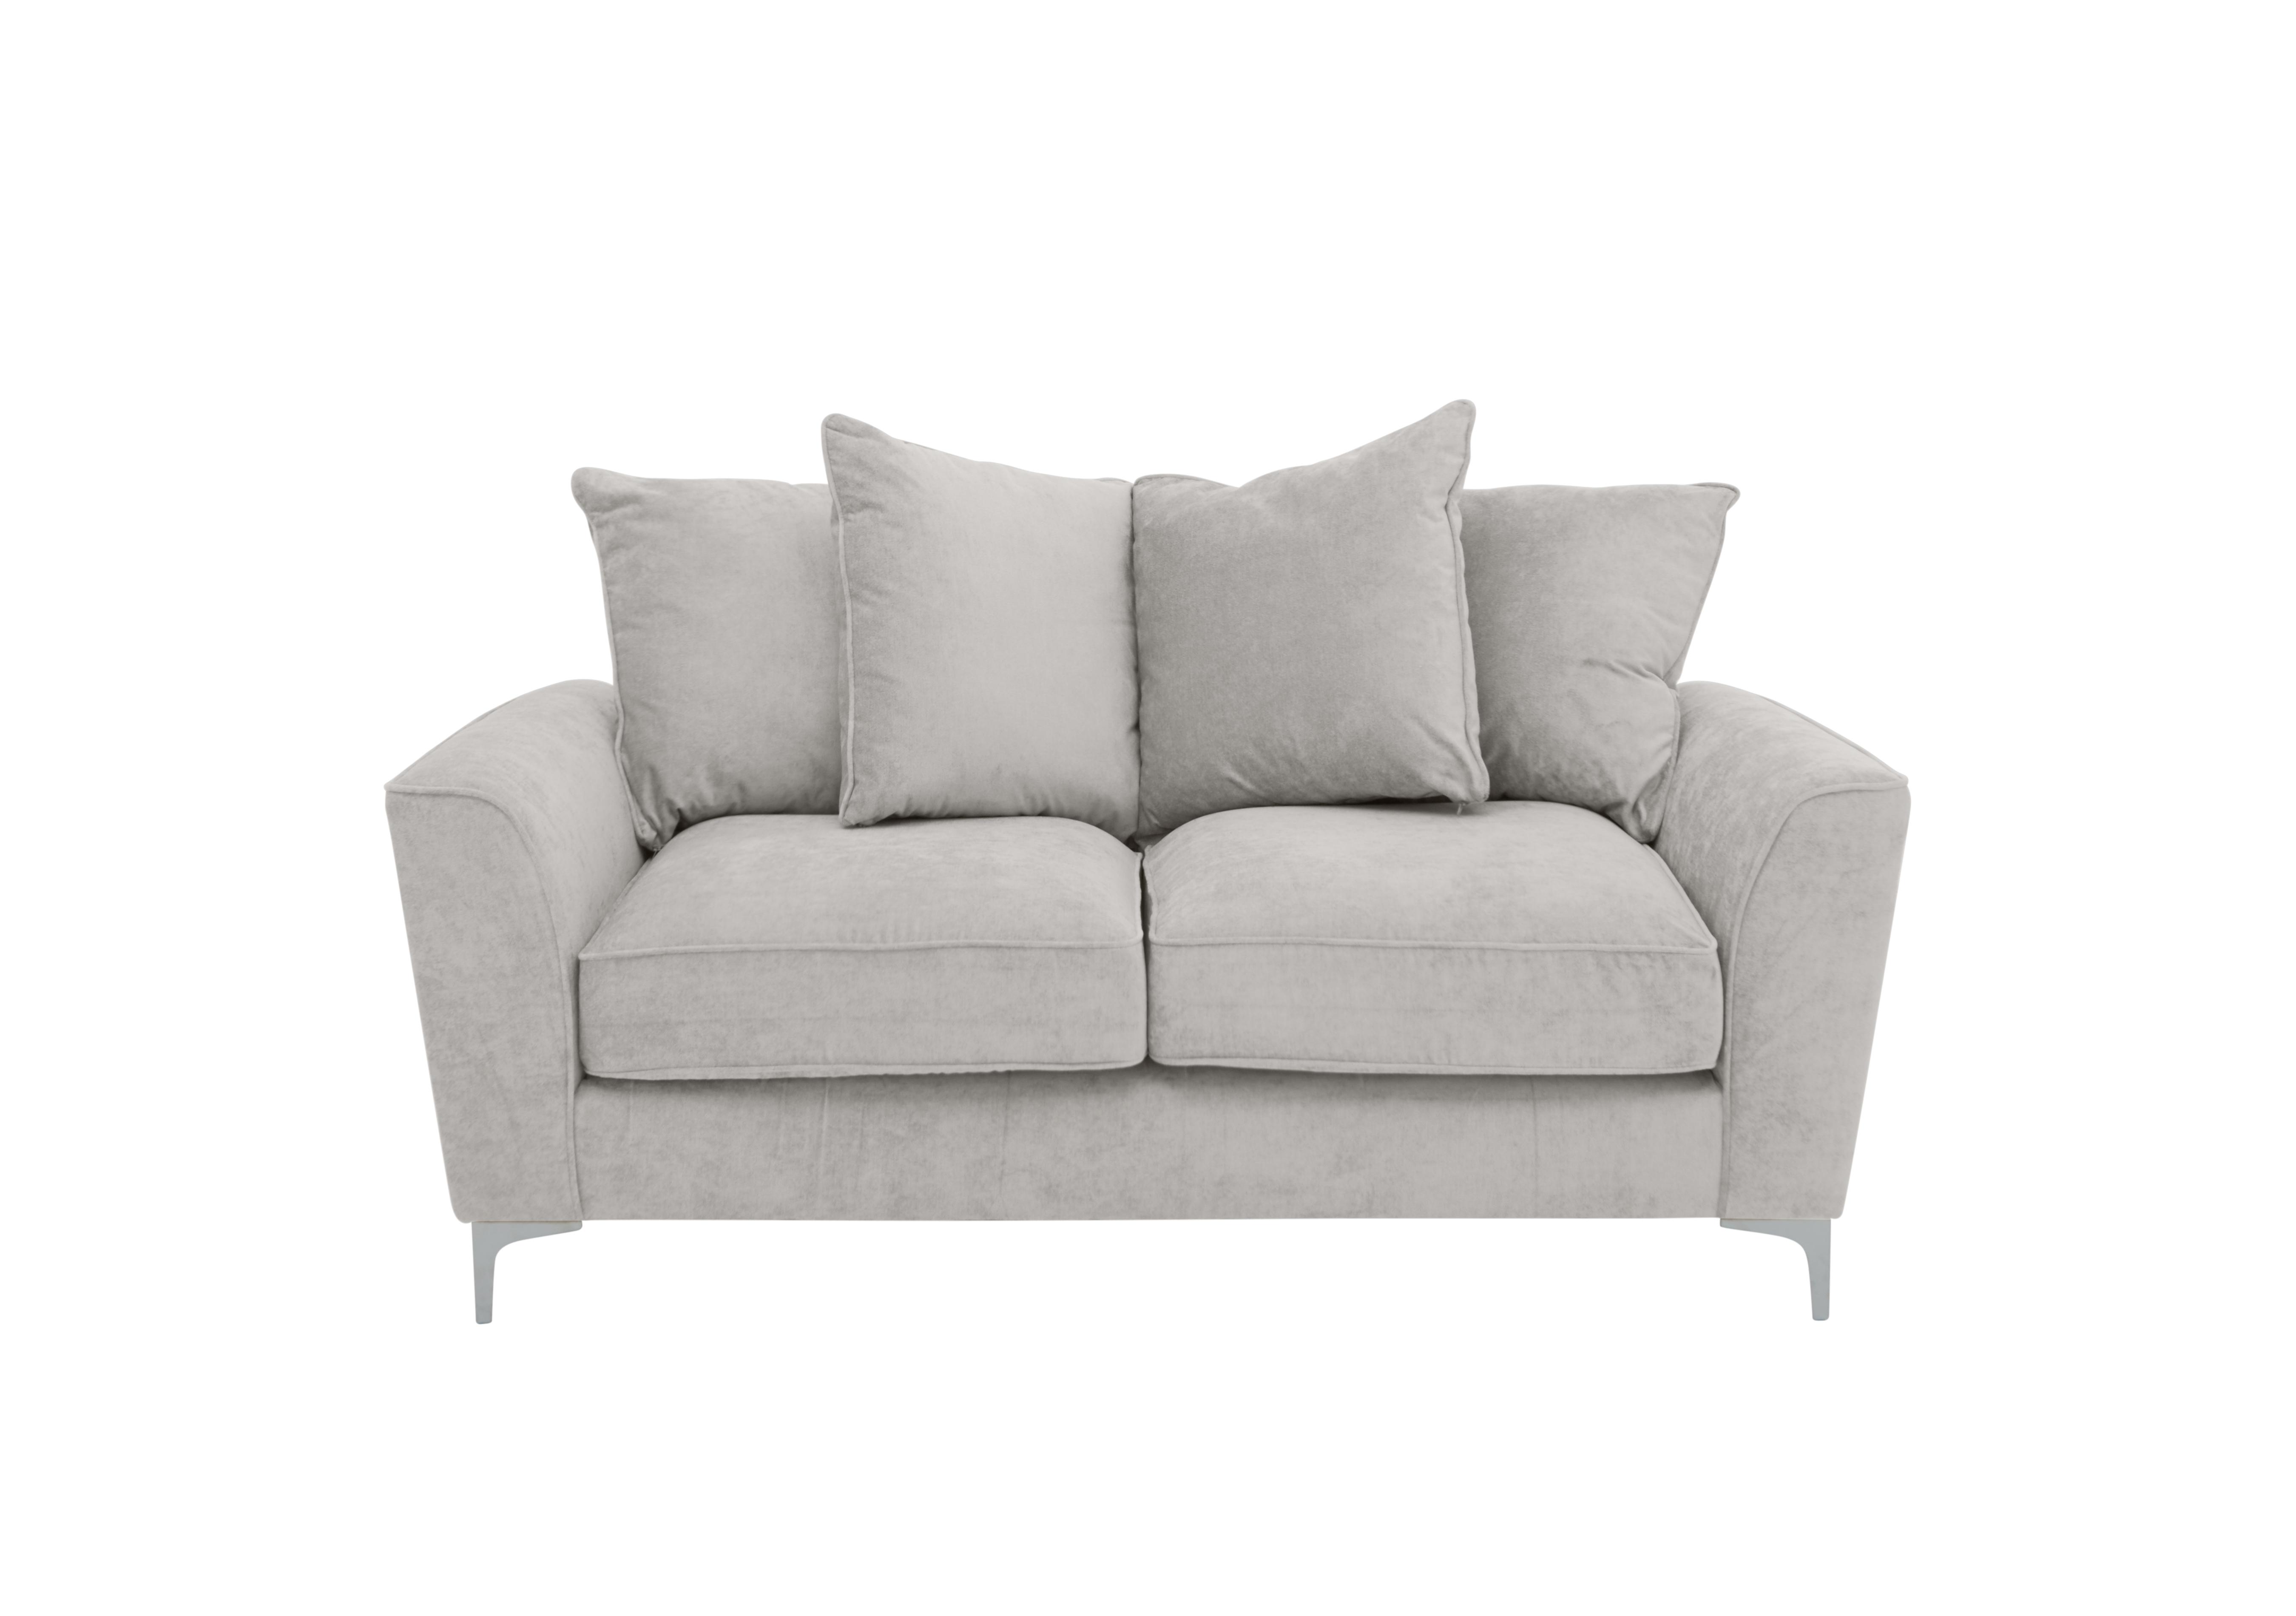 Legend 2 Seater Pillow Back Fabric Sofa in Kingston Silver on Furniture Village